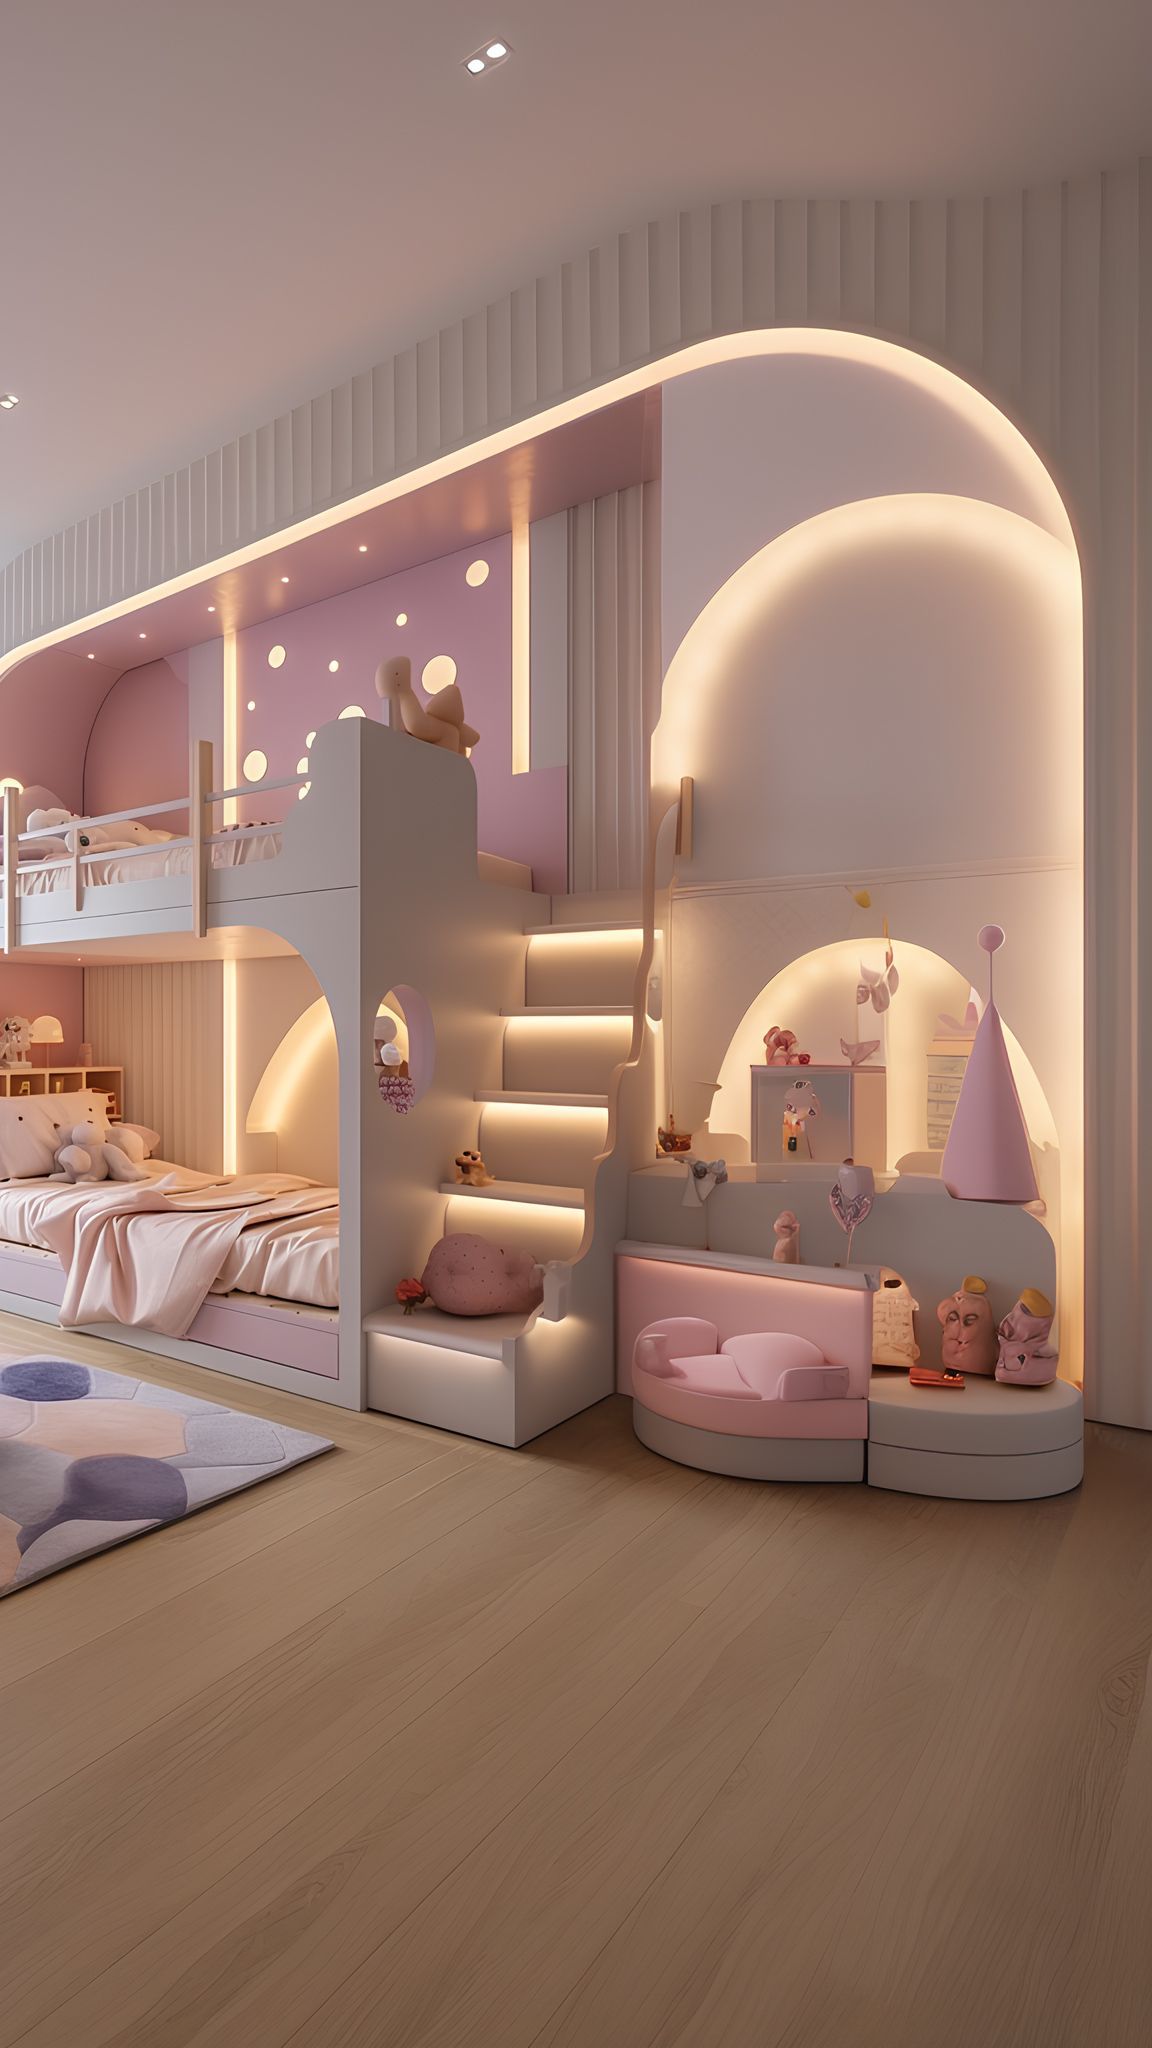 Transform Your Child’s Room with Coordinated Bedroom Furniture Sets